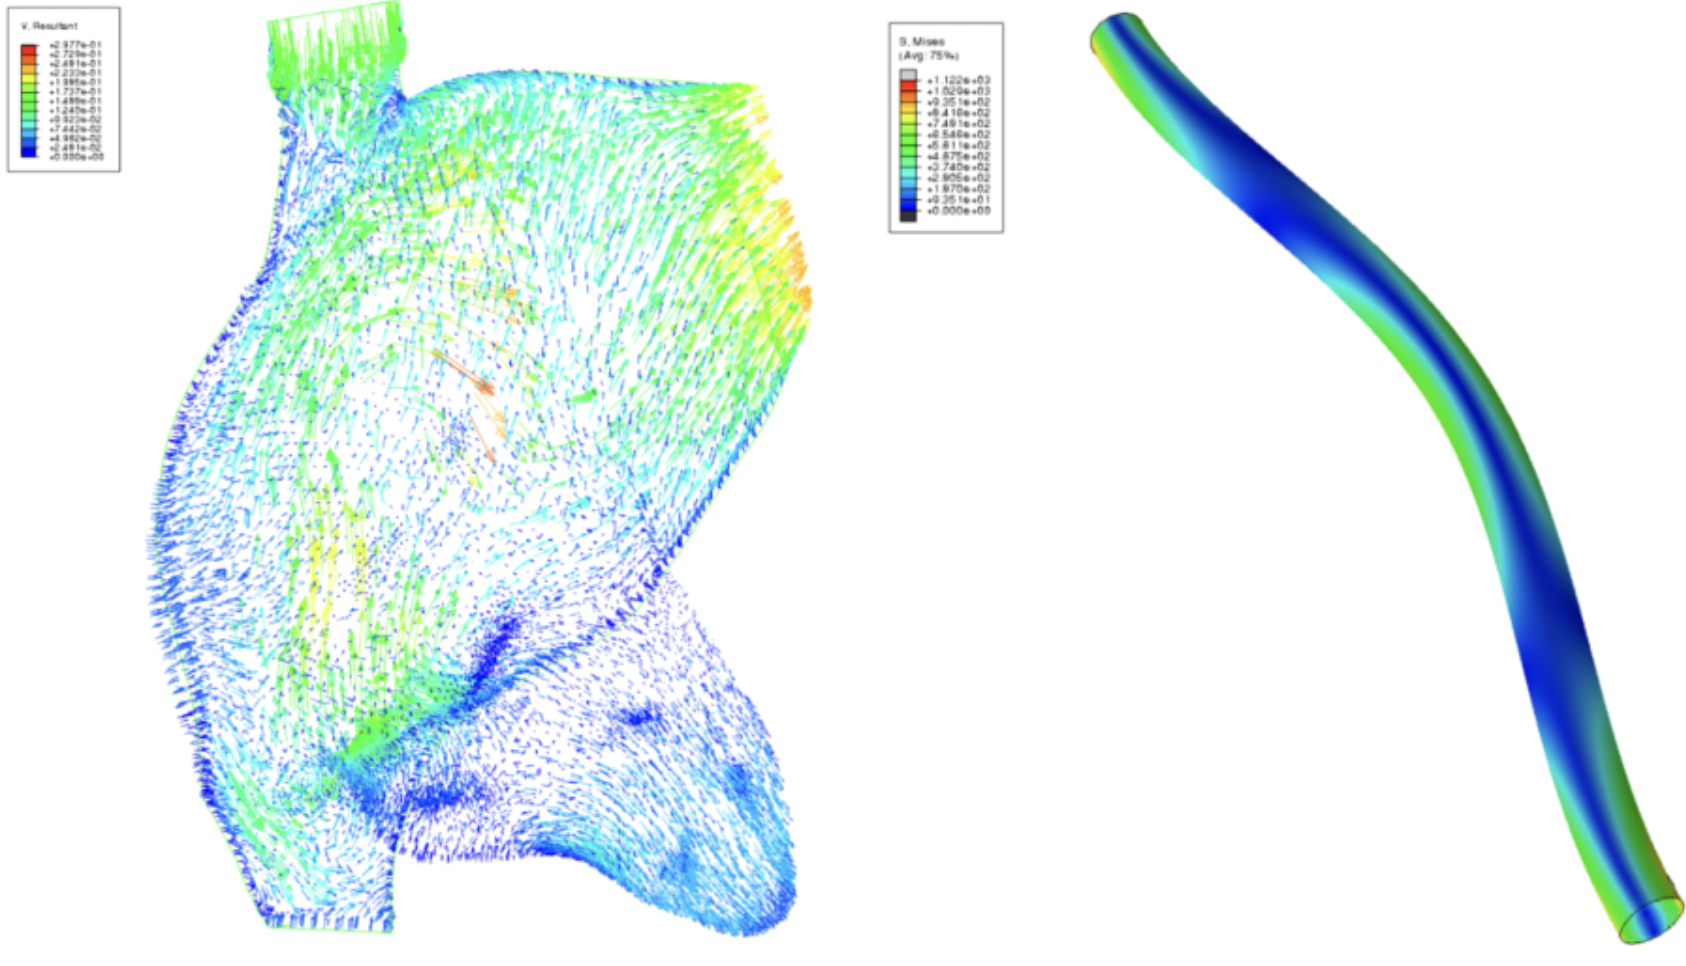 Teaser image for Fluid–Structure Interaction Simulation of Cardiac Leads in the Heart: Developing a Computational Model for Use in Medical Device Design